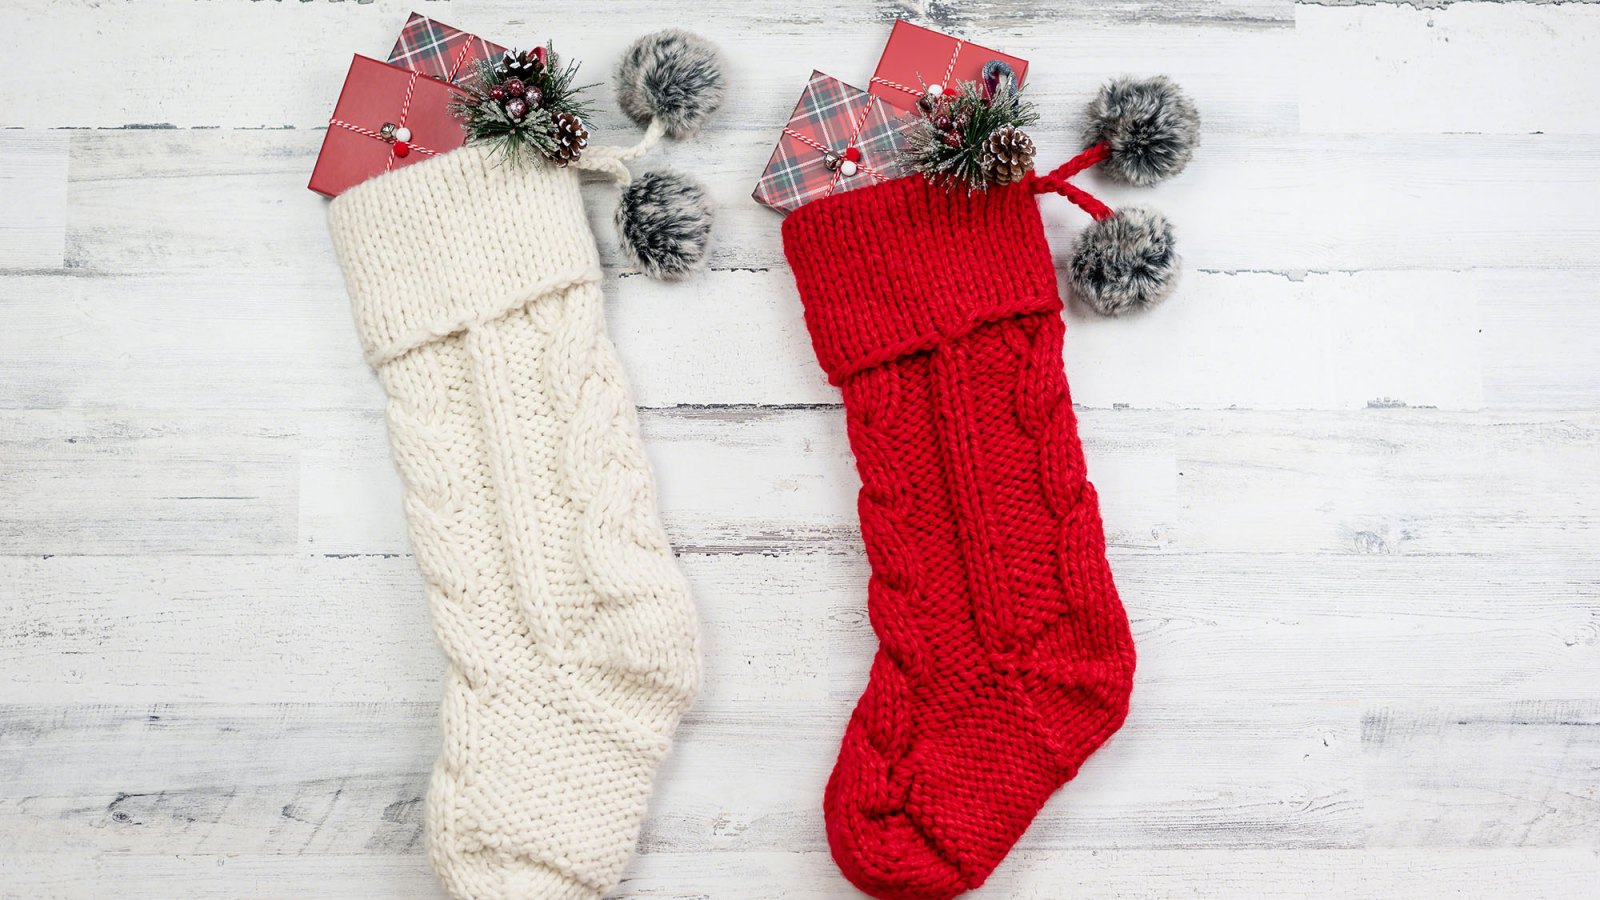 Two knitted Christmas stockings on distressed wood background